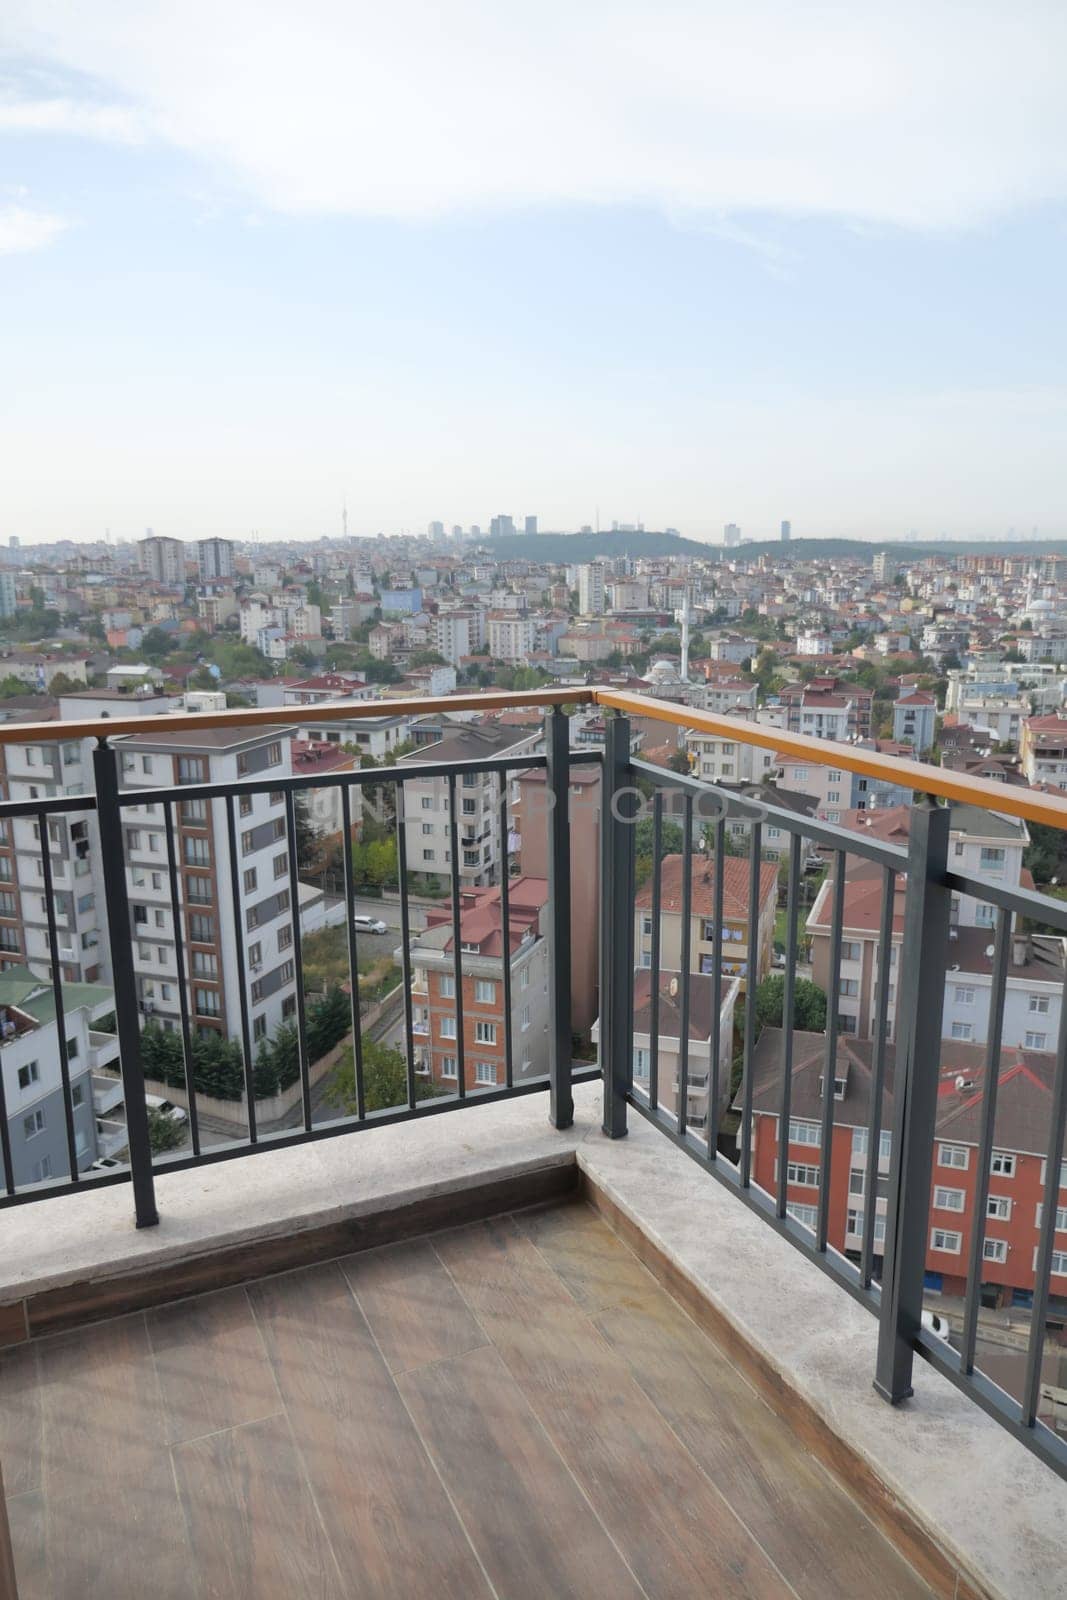 long Apartment balcony in istanbul city